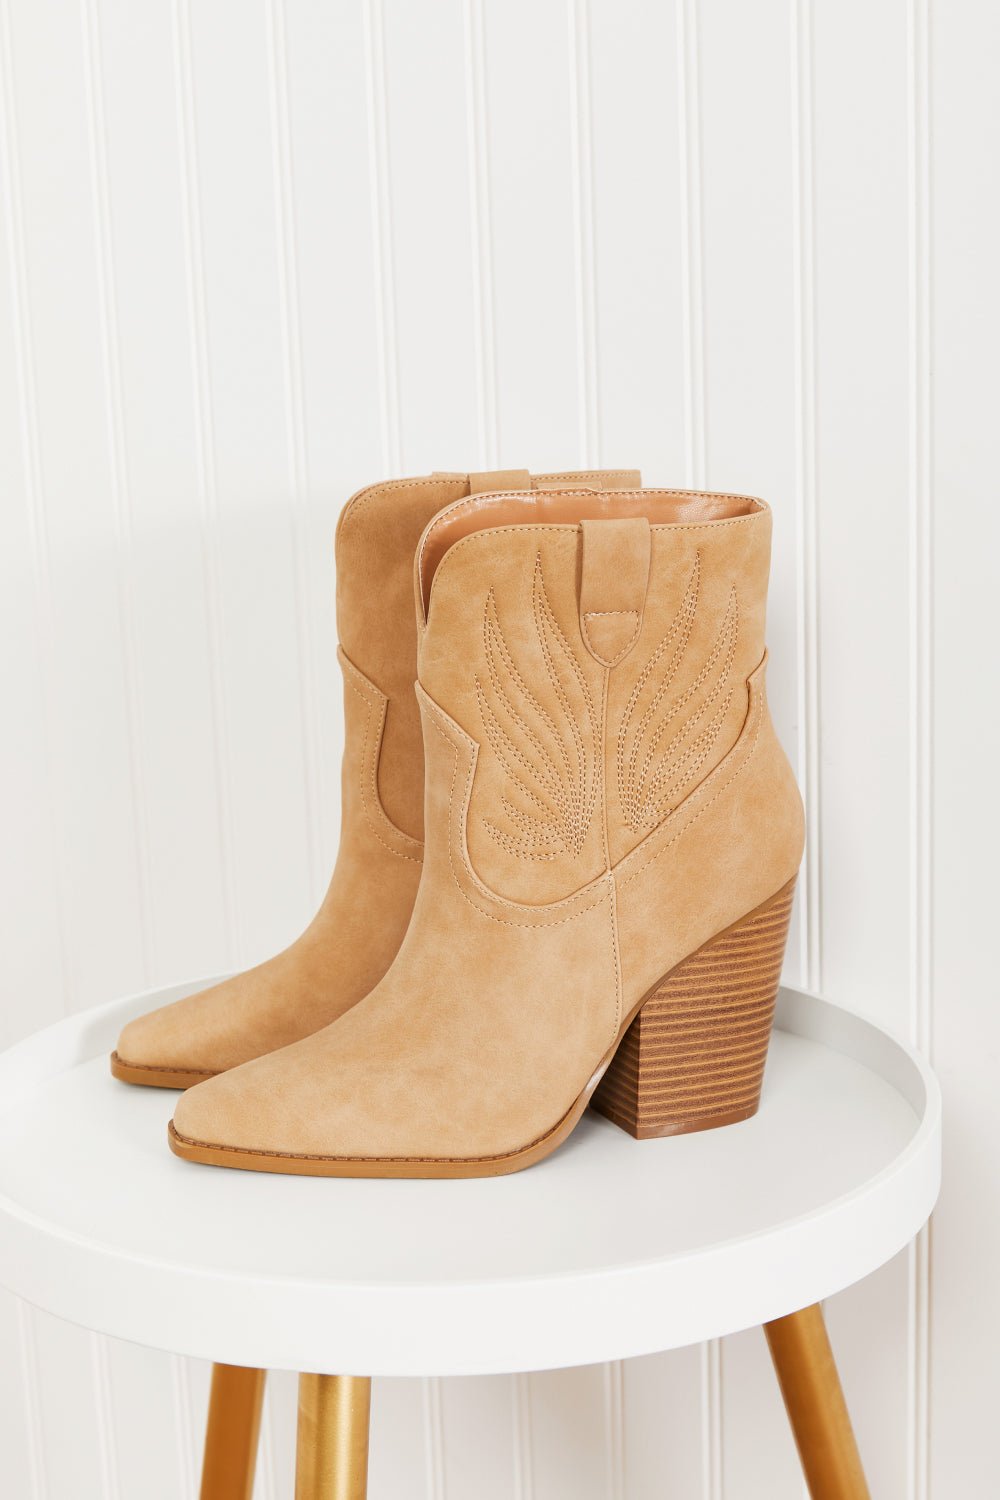 East Lion Corp Lasso My Heart Cowboy Booties - Fashion Girl Online Store